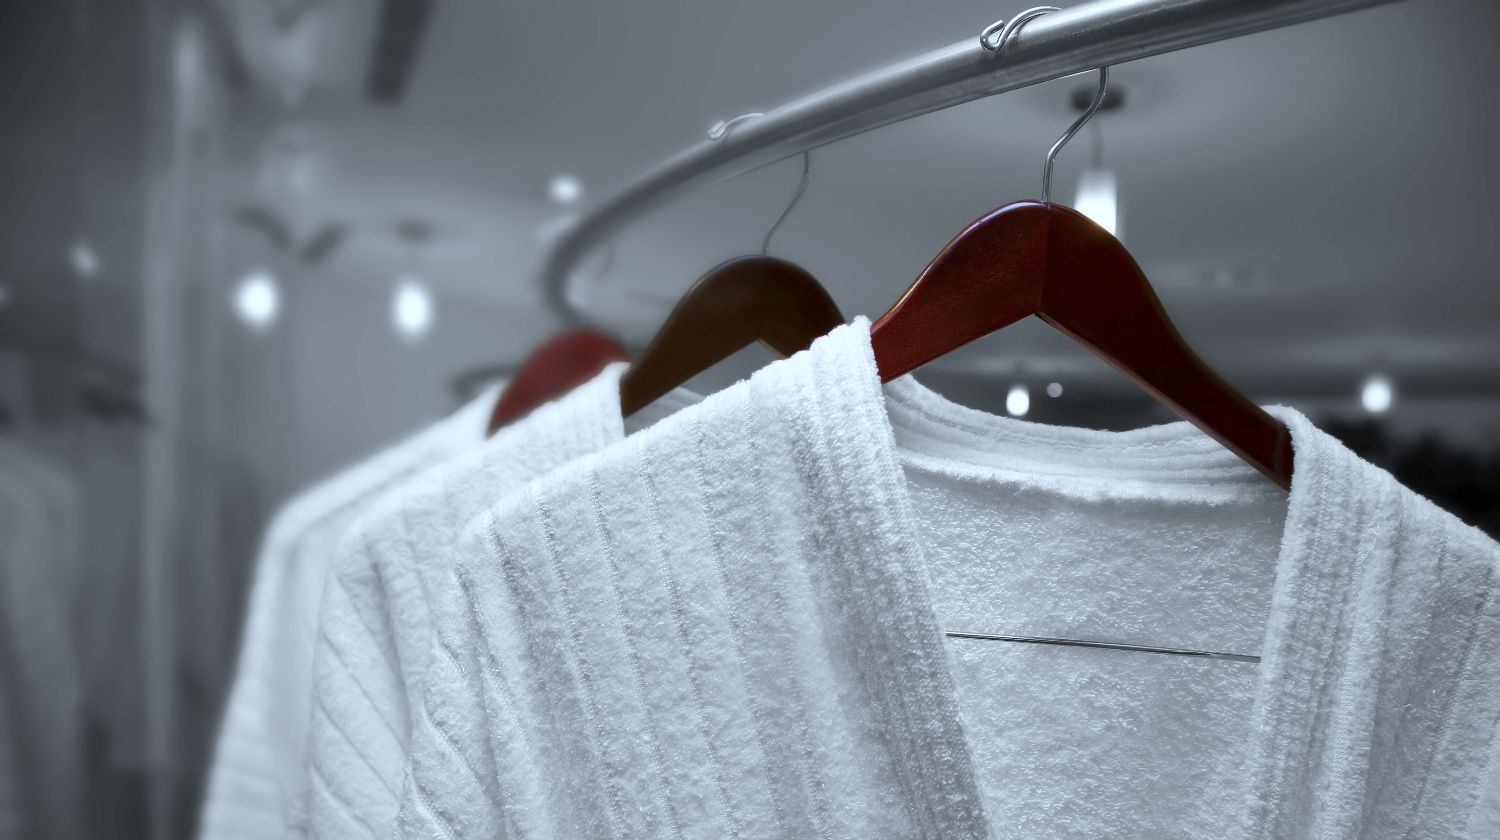 Featured | hotel bathrobes hanger | You Don't Need To Steal Hotel Towels To Own One | hotel bathrobe